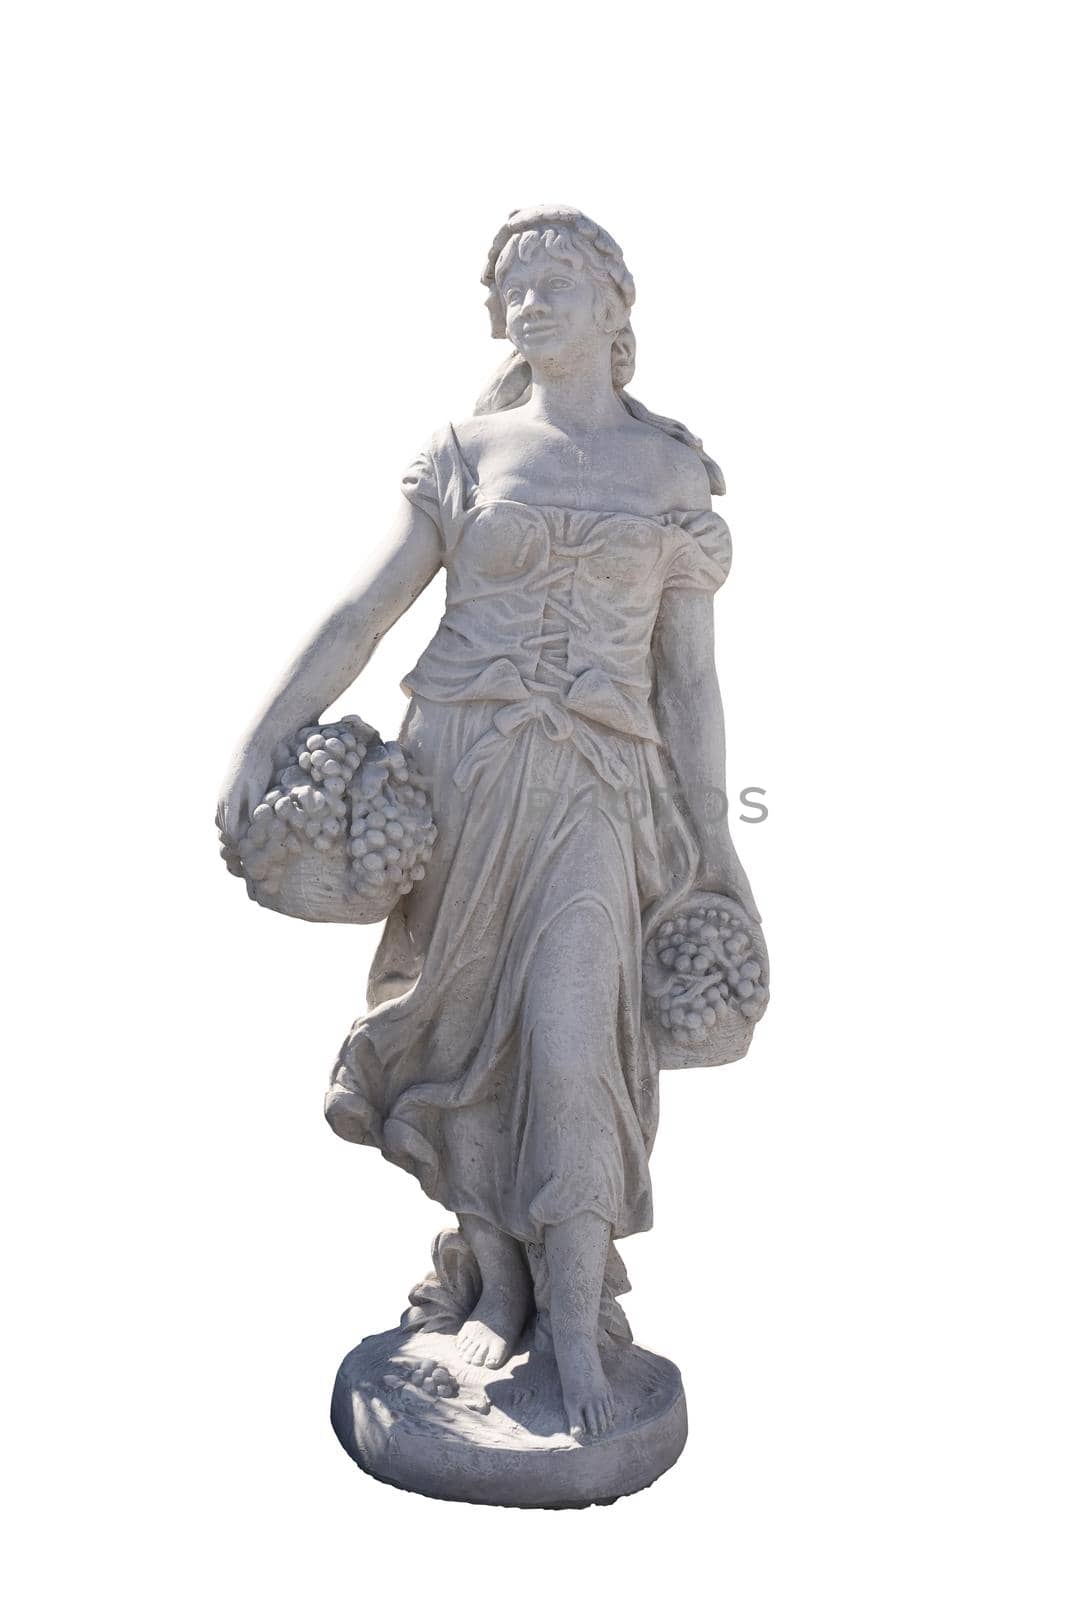 Stone sculpture of woman holding baskets with grapes on white background by Wavebreakmedia